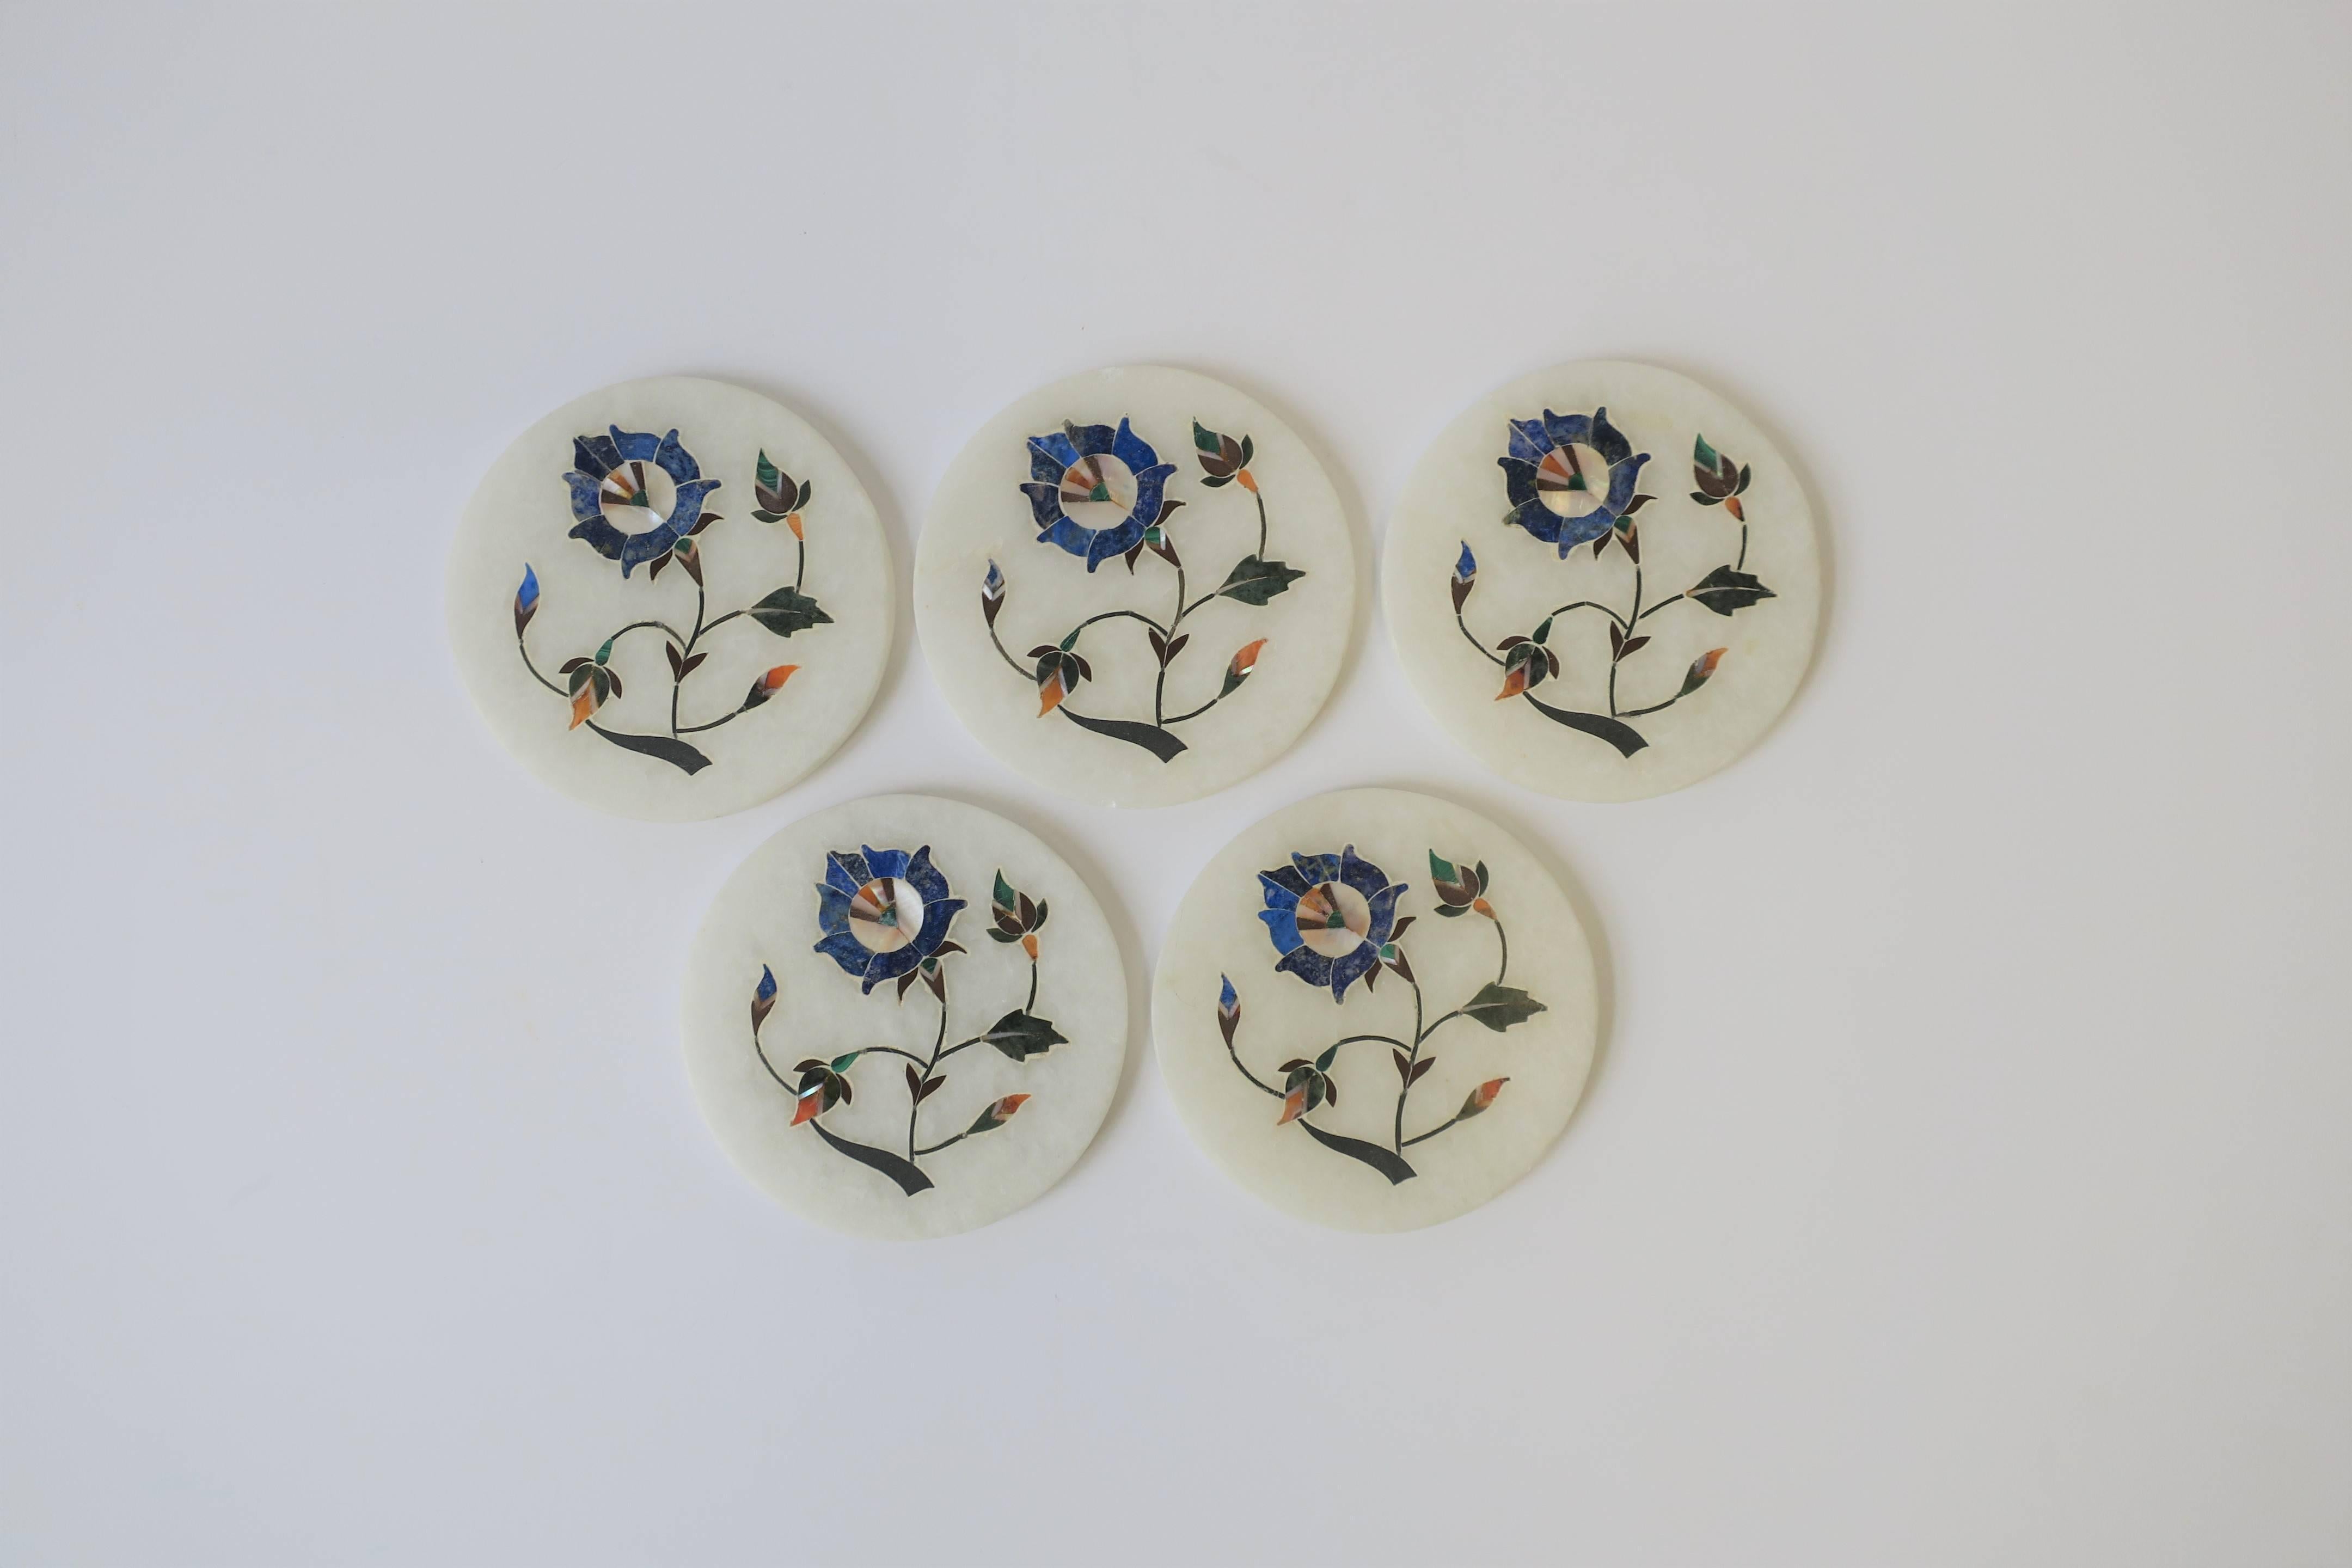 A beautiful set of five vintage handmade white granite marble coaster set with inlaid top design, in the style of Anglo Raj, circa 20th century India. The white granite marble is inlaid with various semi precious stones including, blue lapis lazuli,